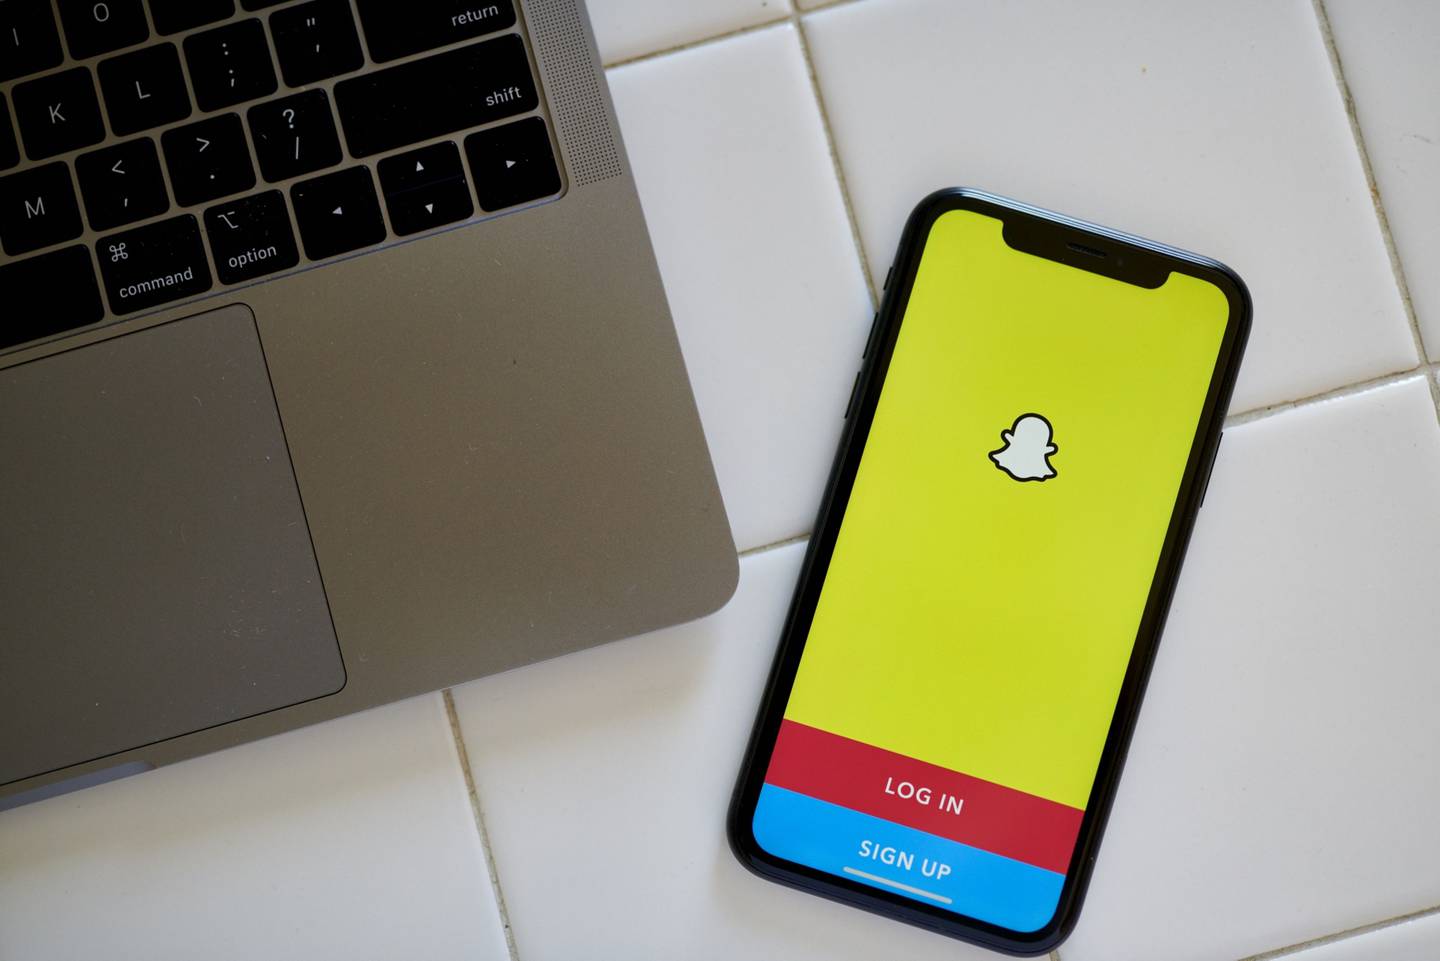 Snap Inc.’s (SNAP) poor results and Twitter Inc.’s (TWTR) sales miss raised concern about online ad spending.